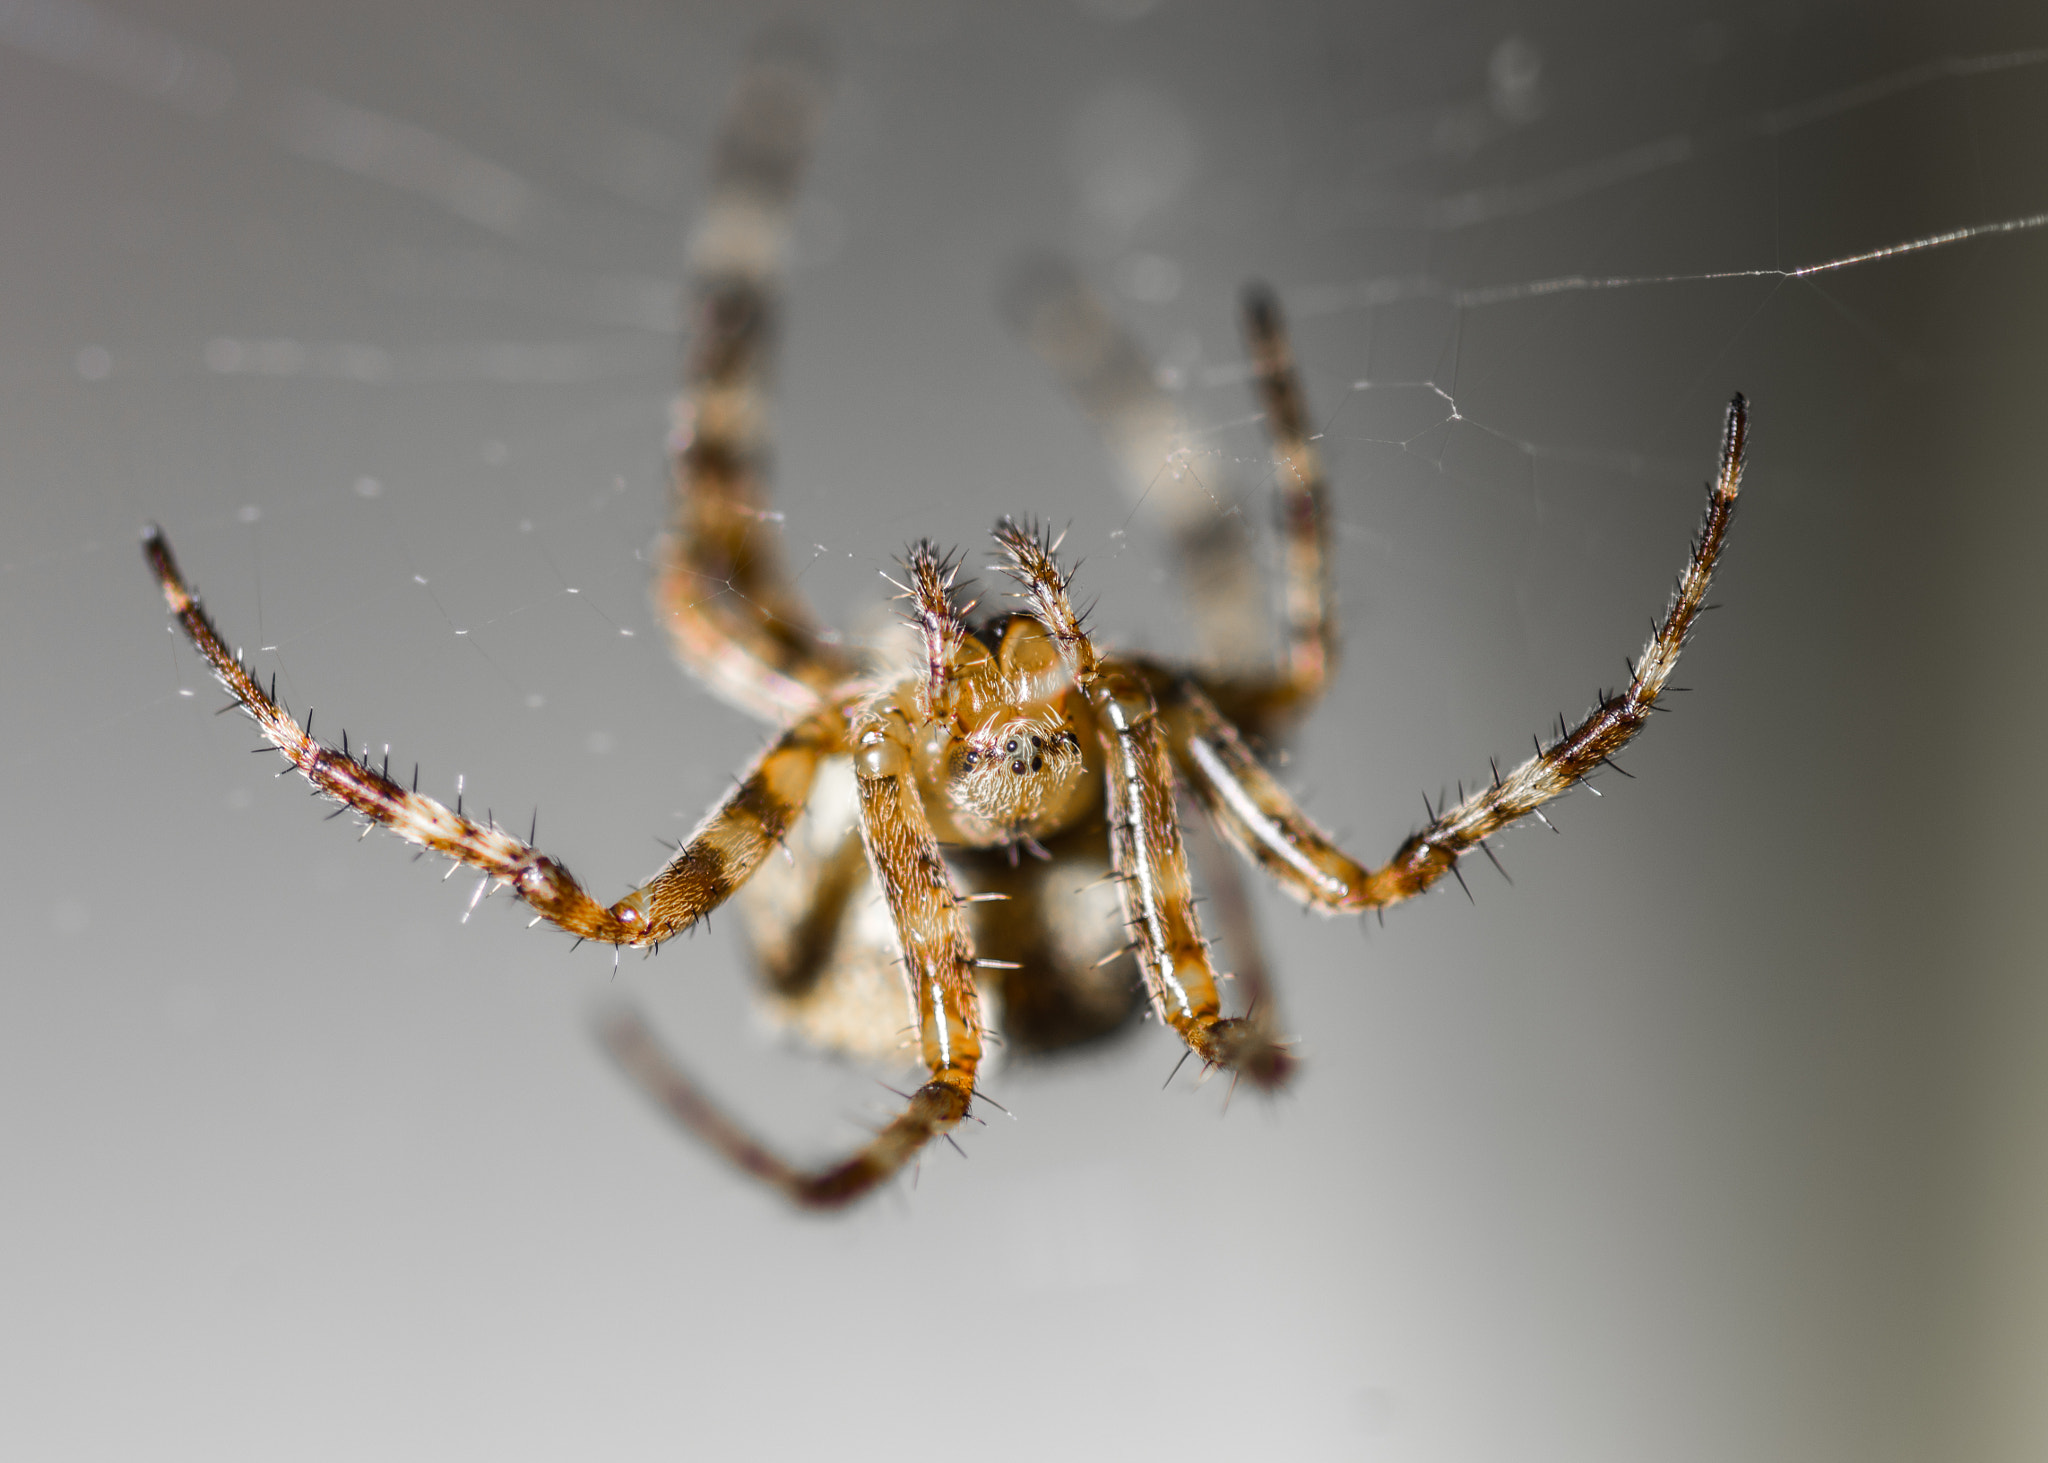 Pentax K-5 II + Tamron SP AF 90mm F2.8 Di Macro sample photo. Common spider photography